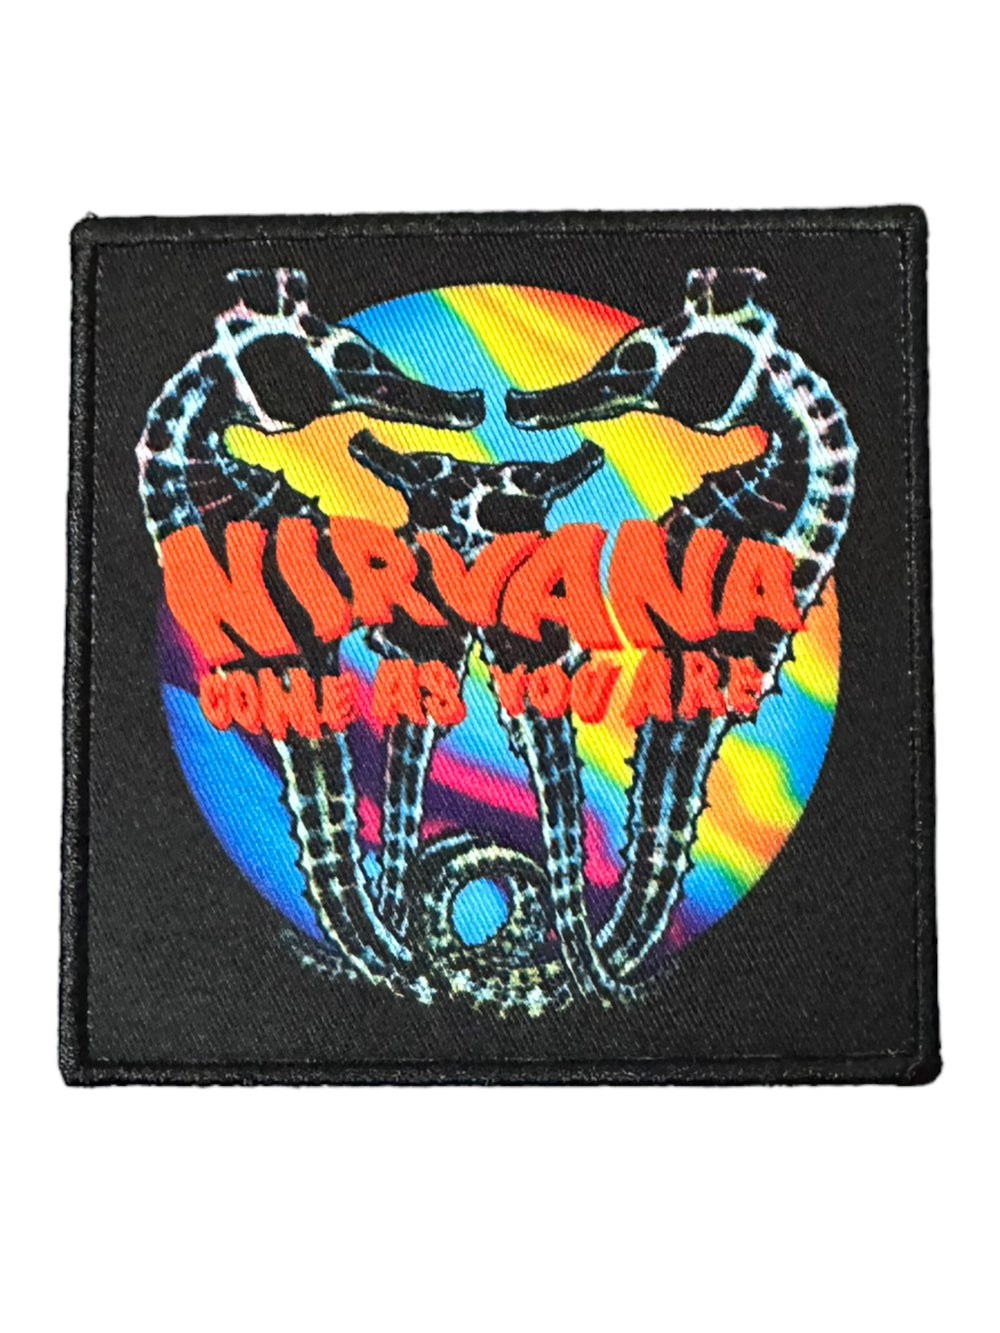 Nirvana Come As You Are Official Woven Patch Brand New